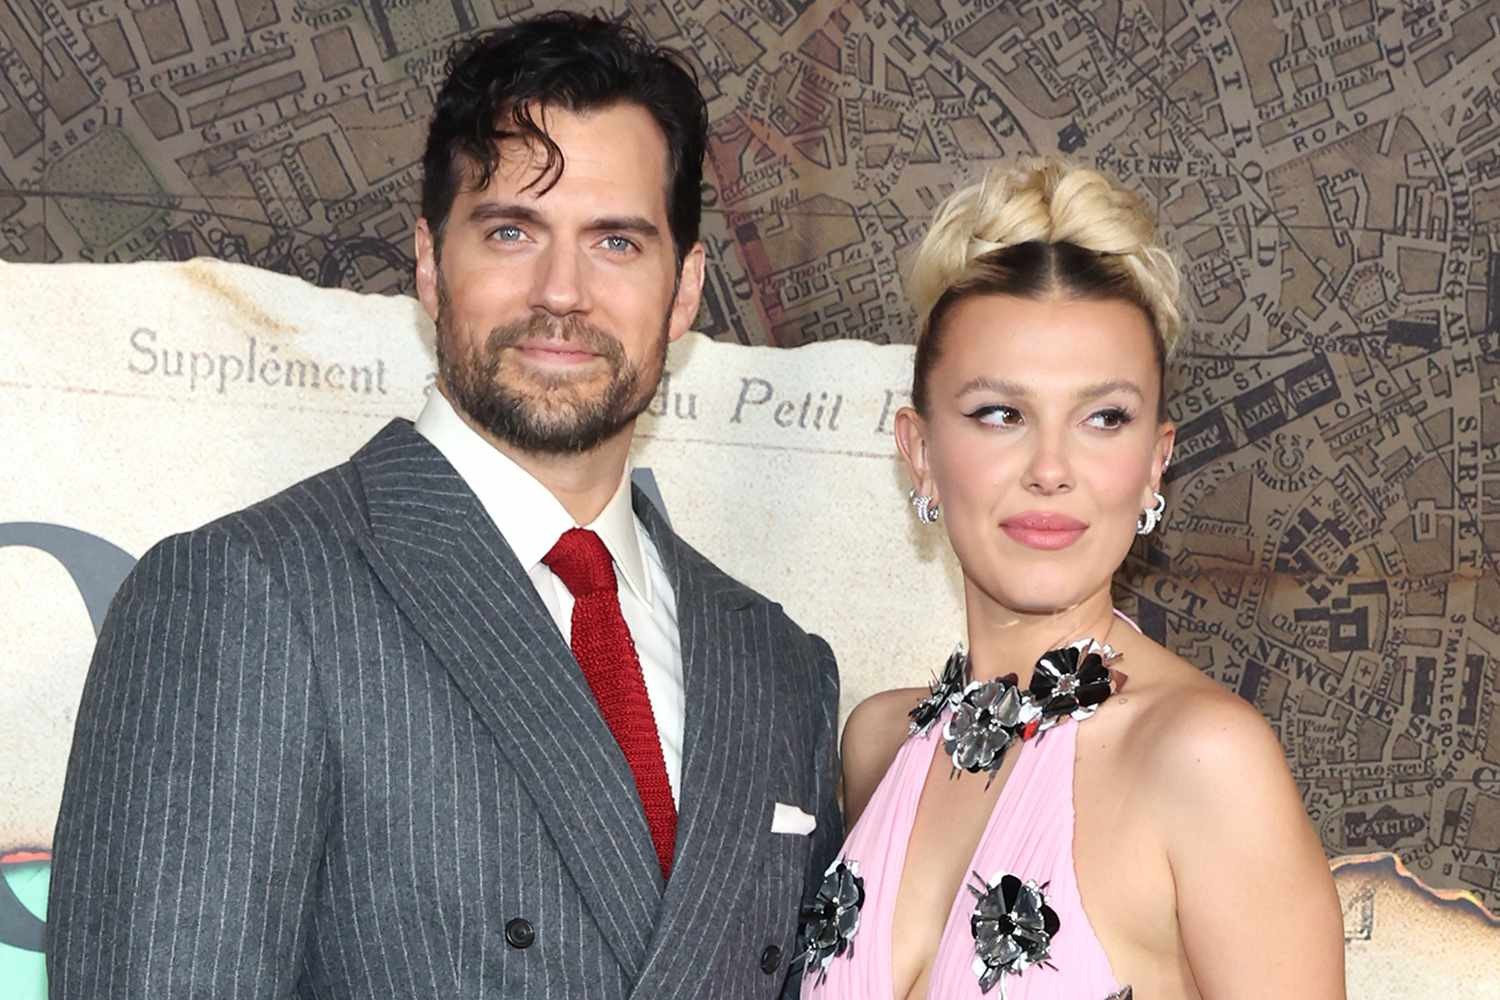 Henry Cavill and Millie Bobby Brown.